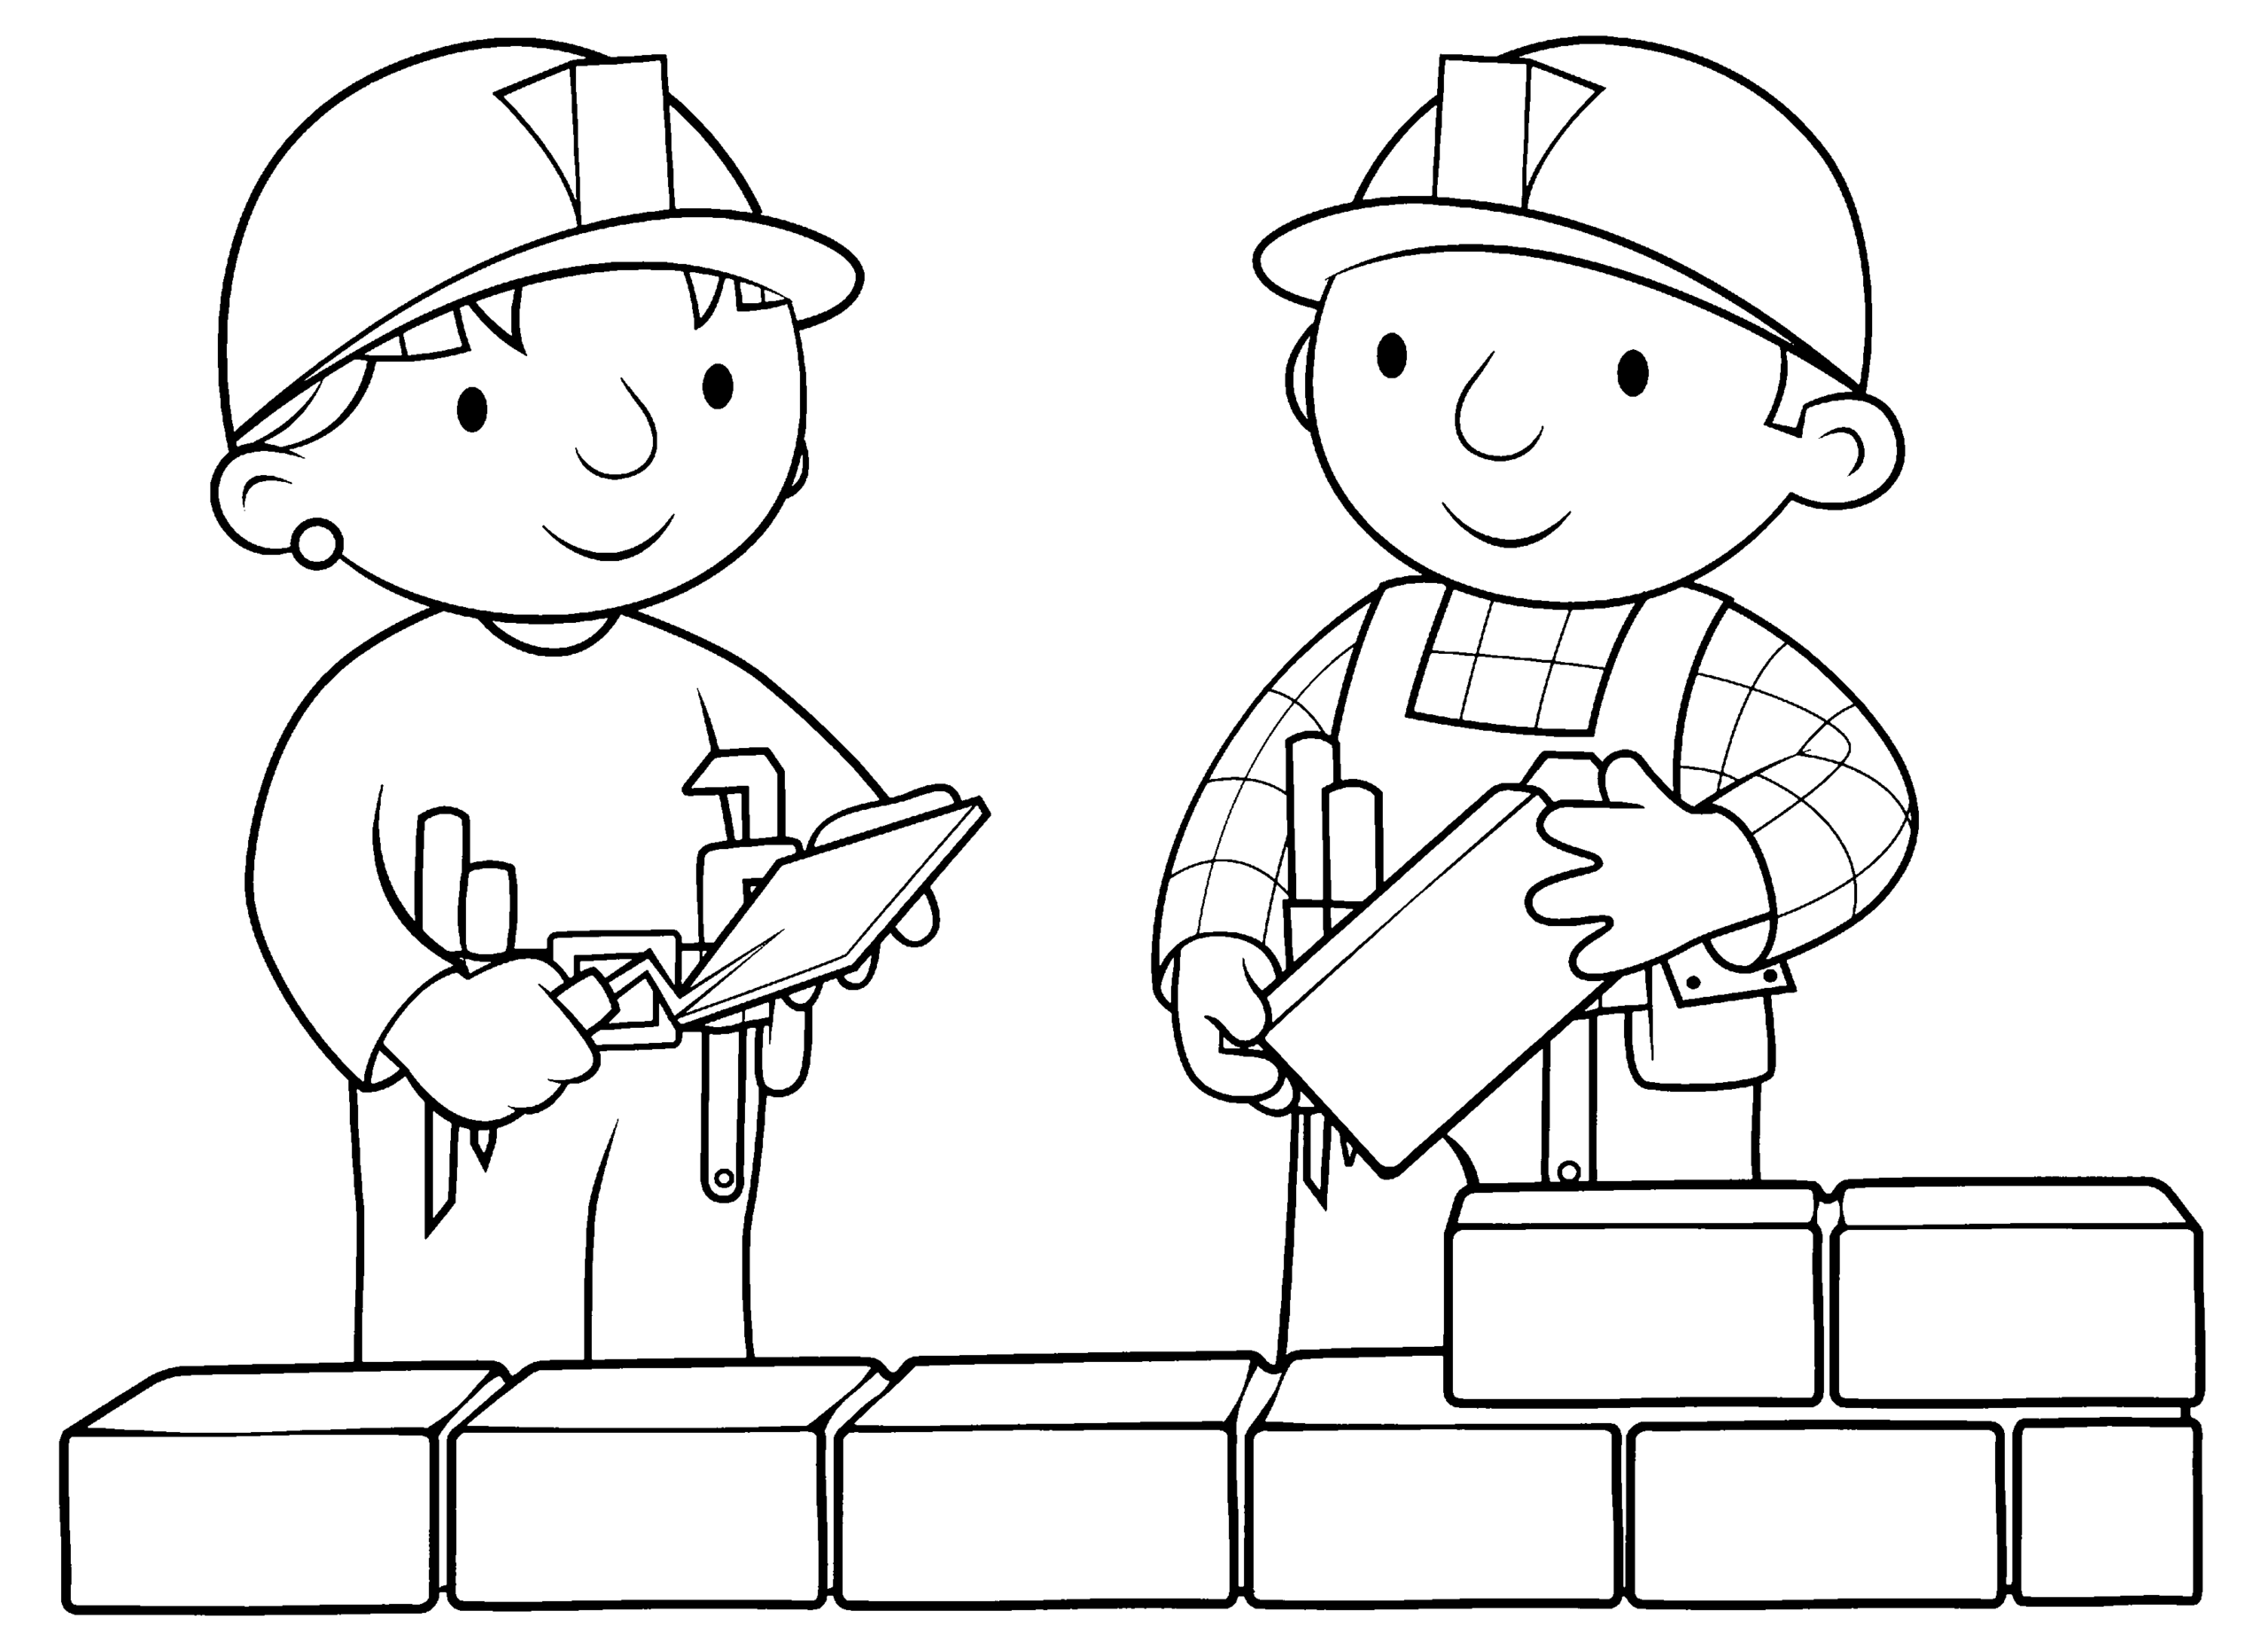 Bob the Builder Coloring Pages TV Film Bob The Builder Images Printable 2020 01112 Coloring4free